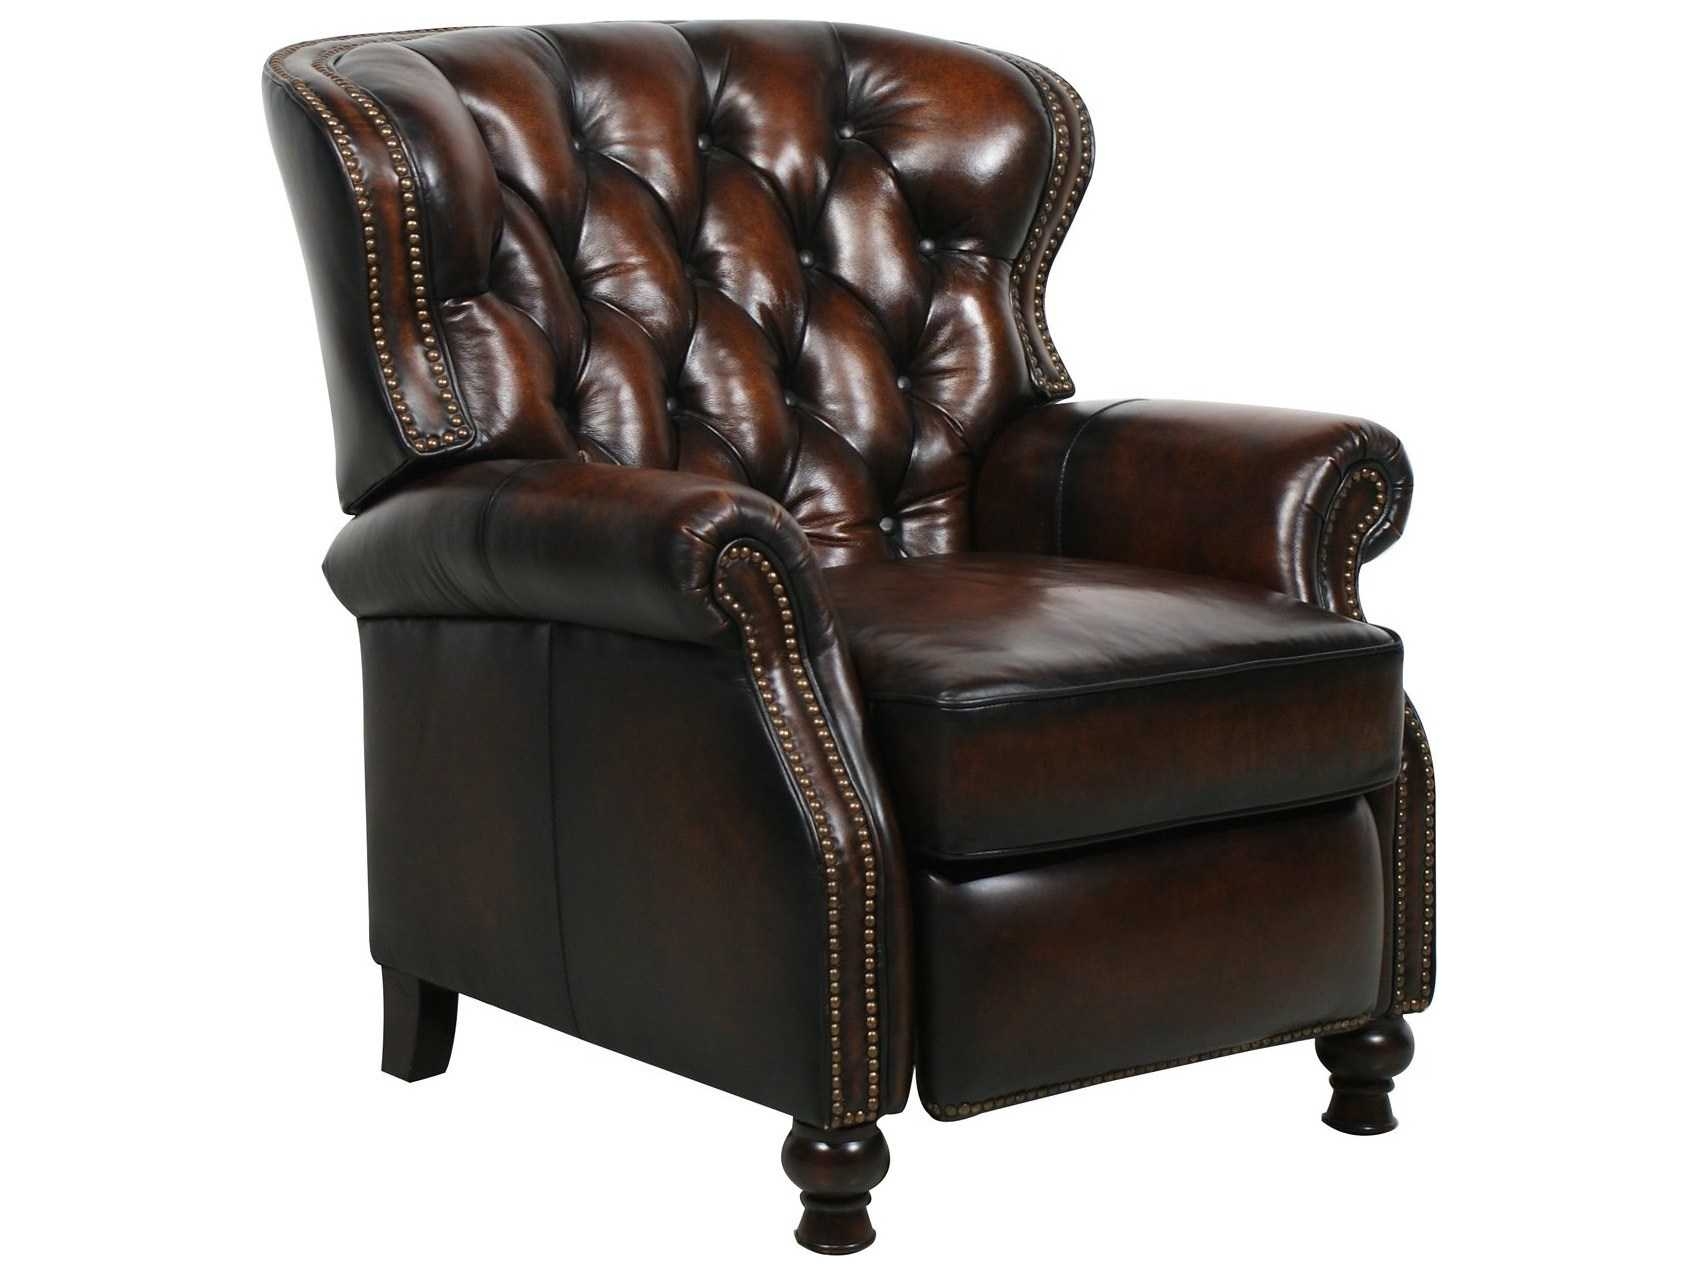 Top Grain Leather Recliner Visualhunt, Genuine Leather Recliner Chair